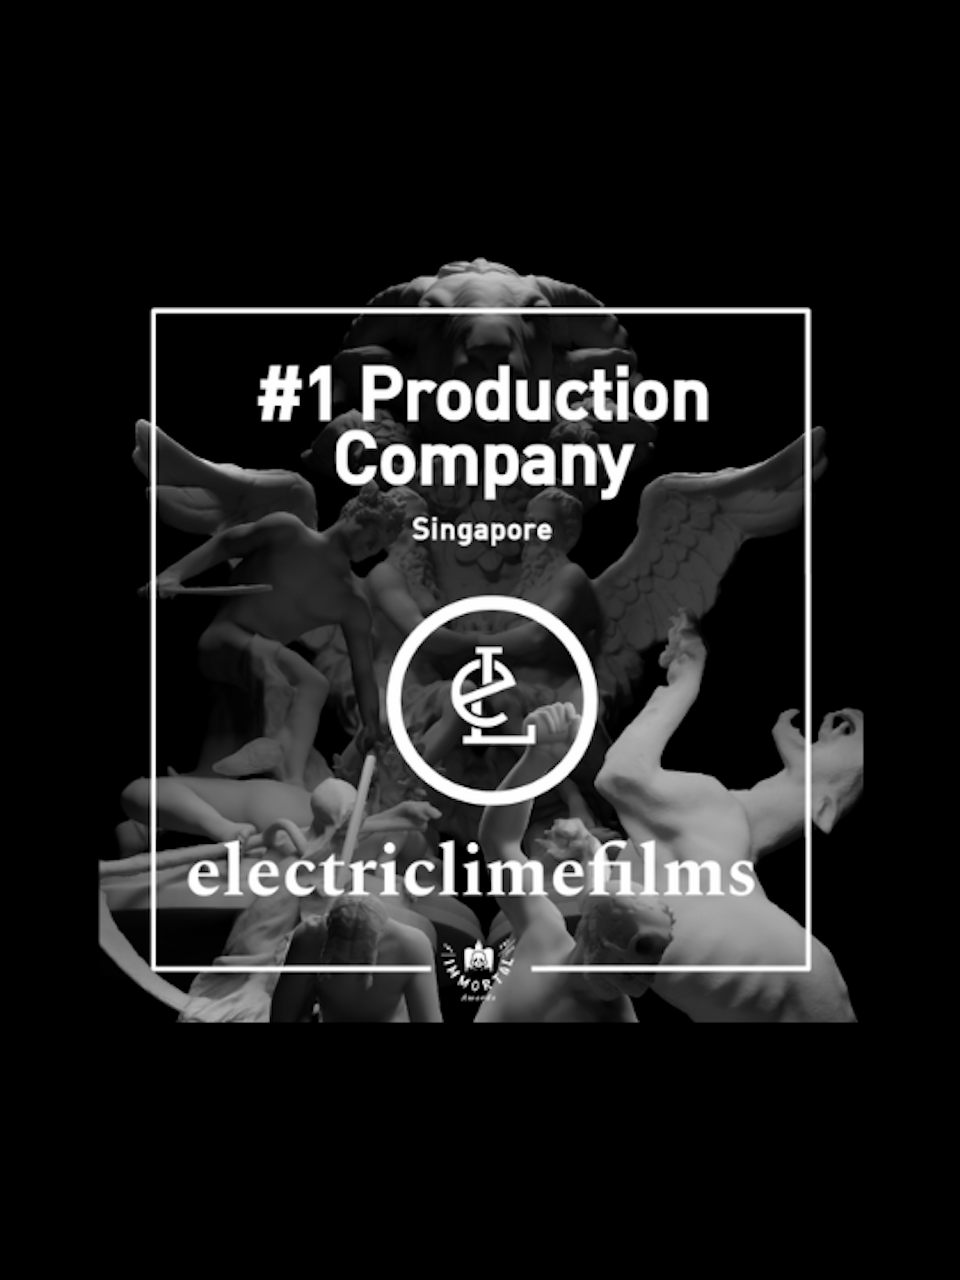 electriclime° - Immortal Awards | electriclimefilms recognised by LBB Online's League Table of Creativity